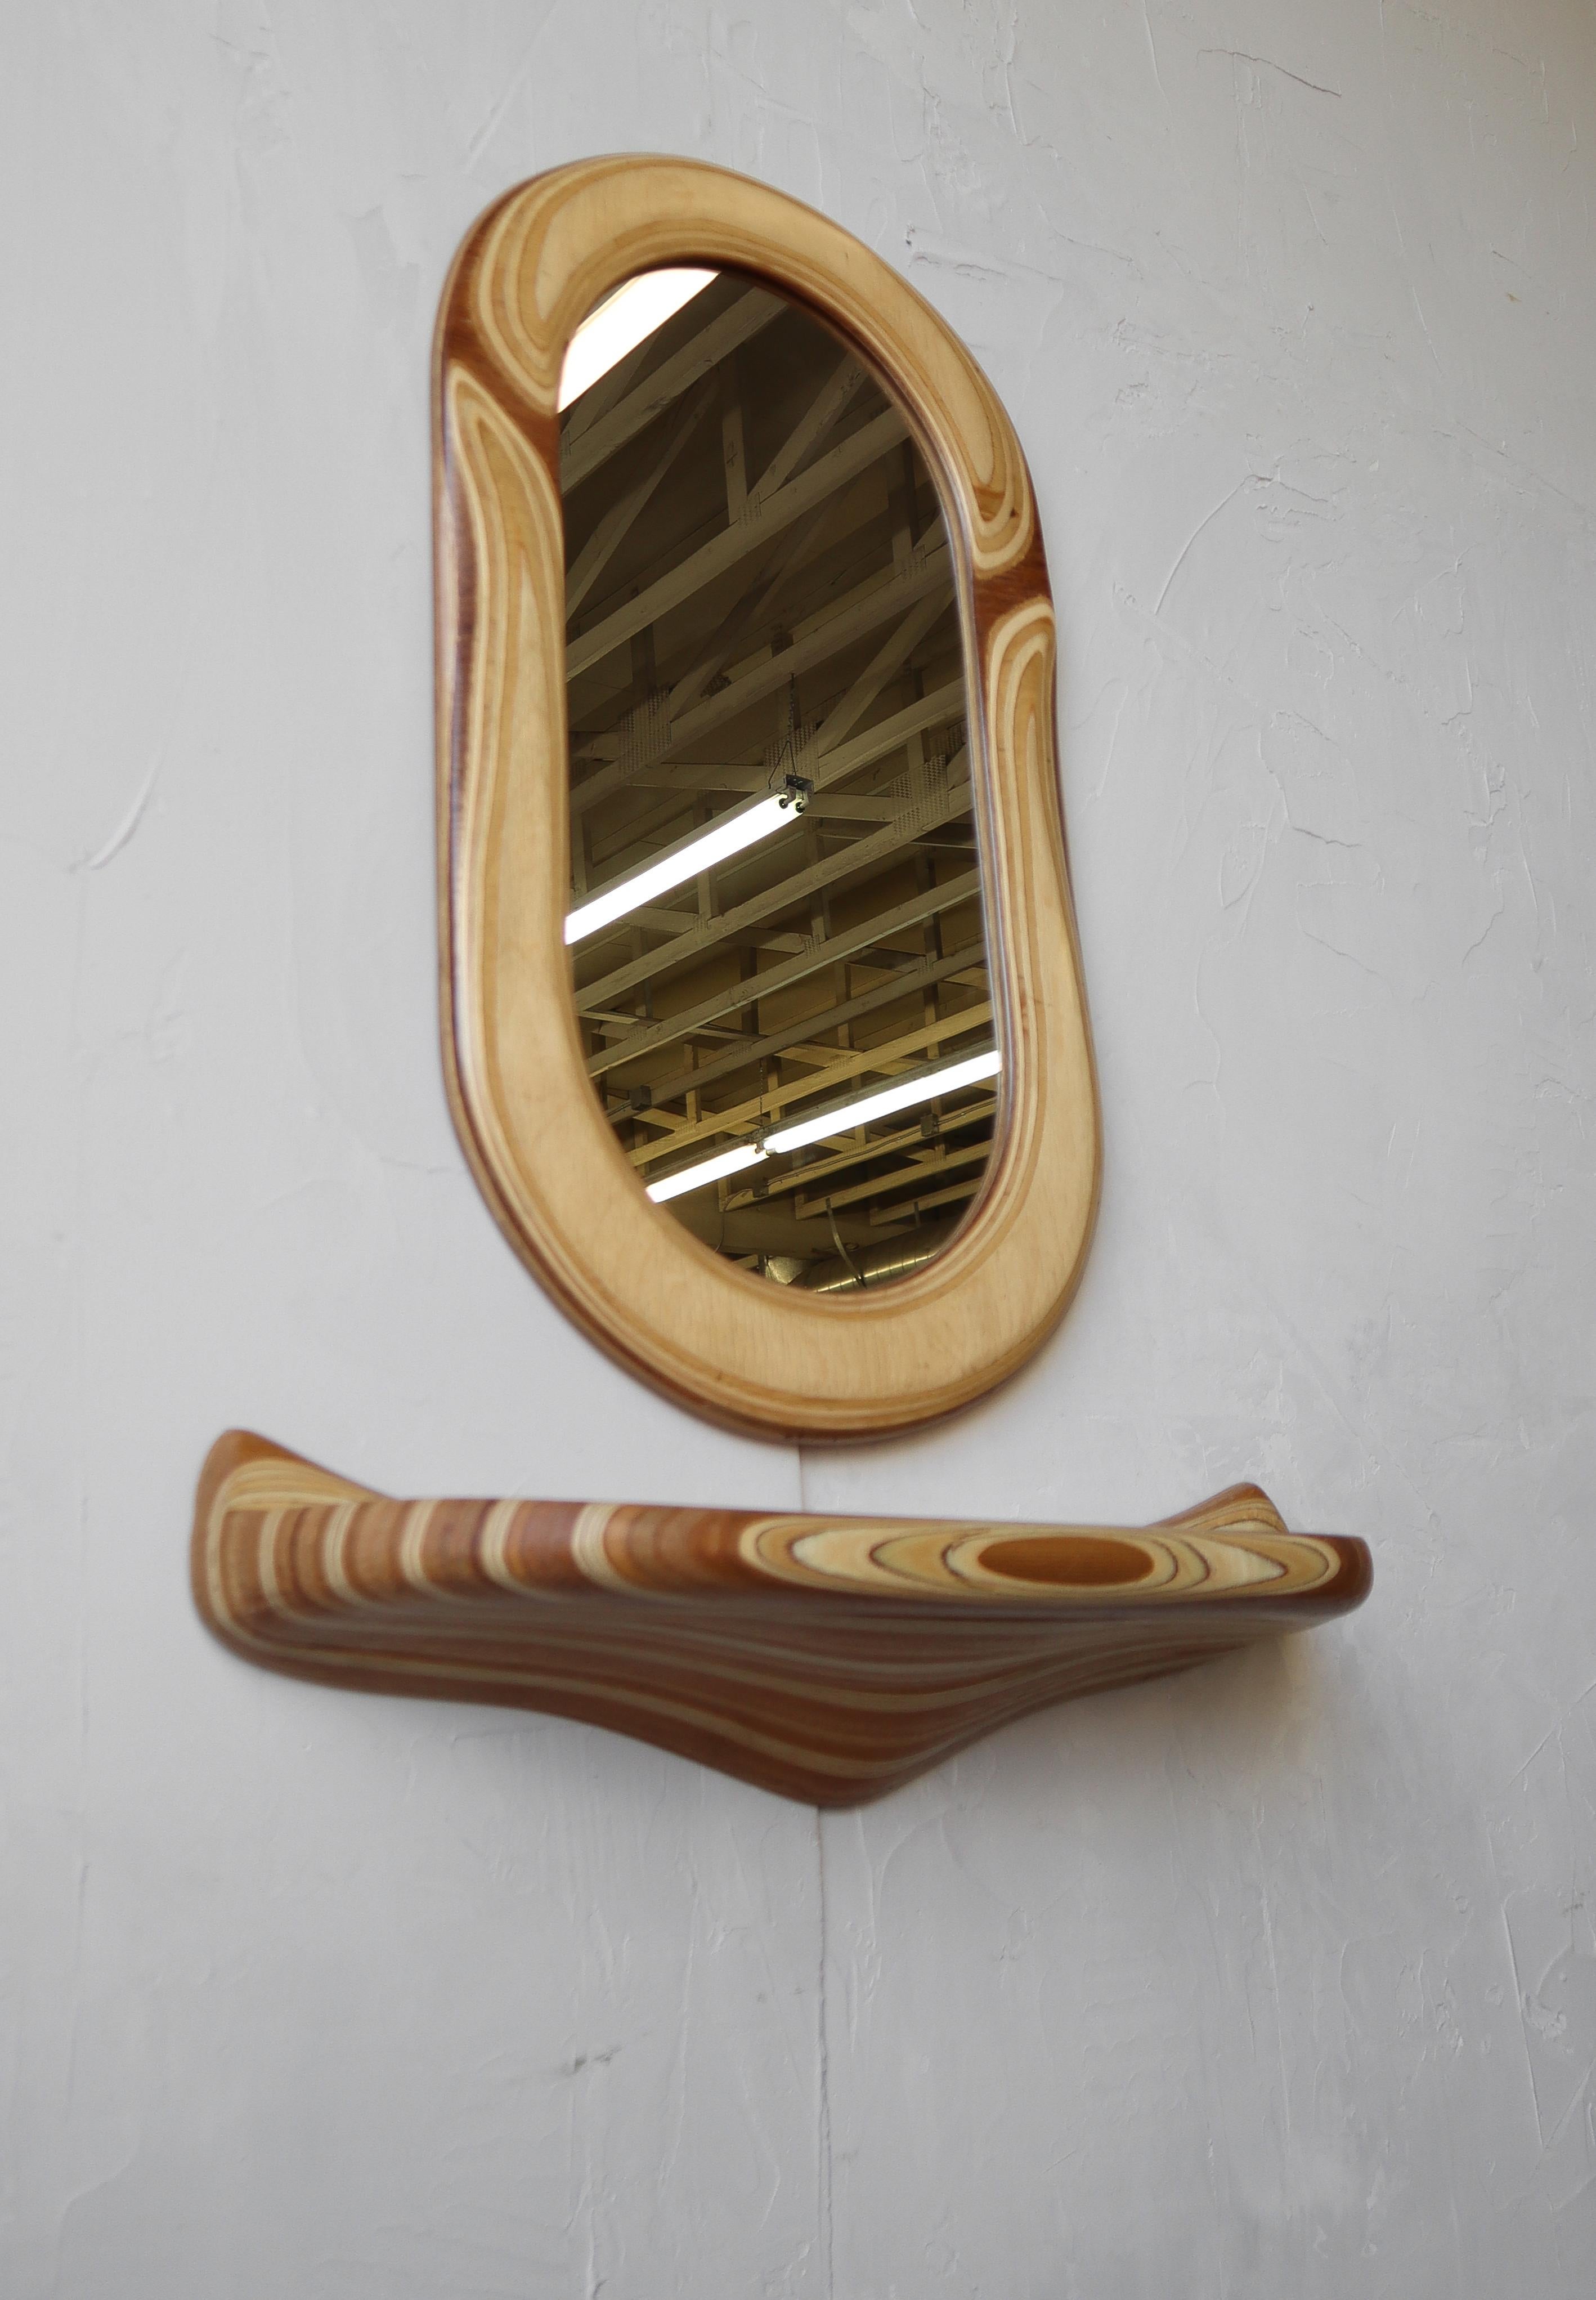 Organic Molded Plywood Mirror and Shelf Set In Good Condition For Sale In Las Vegas, NV